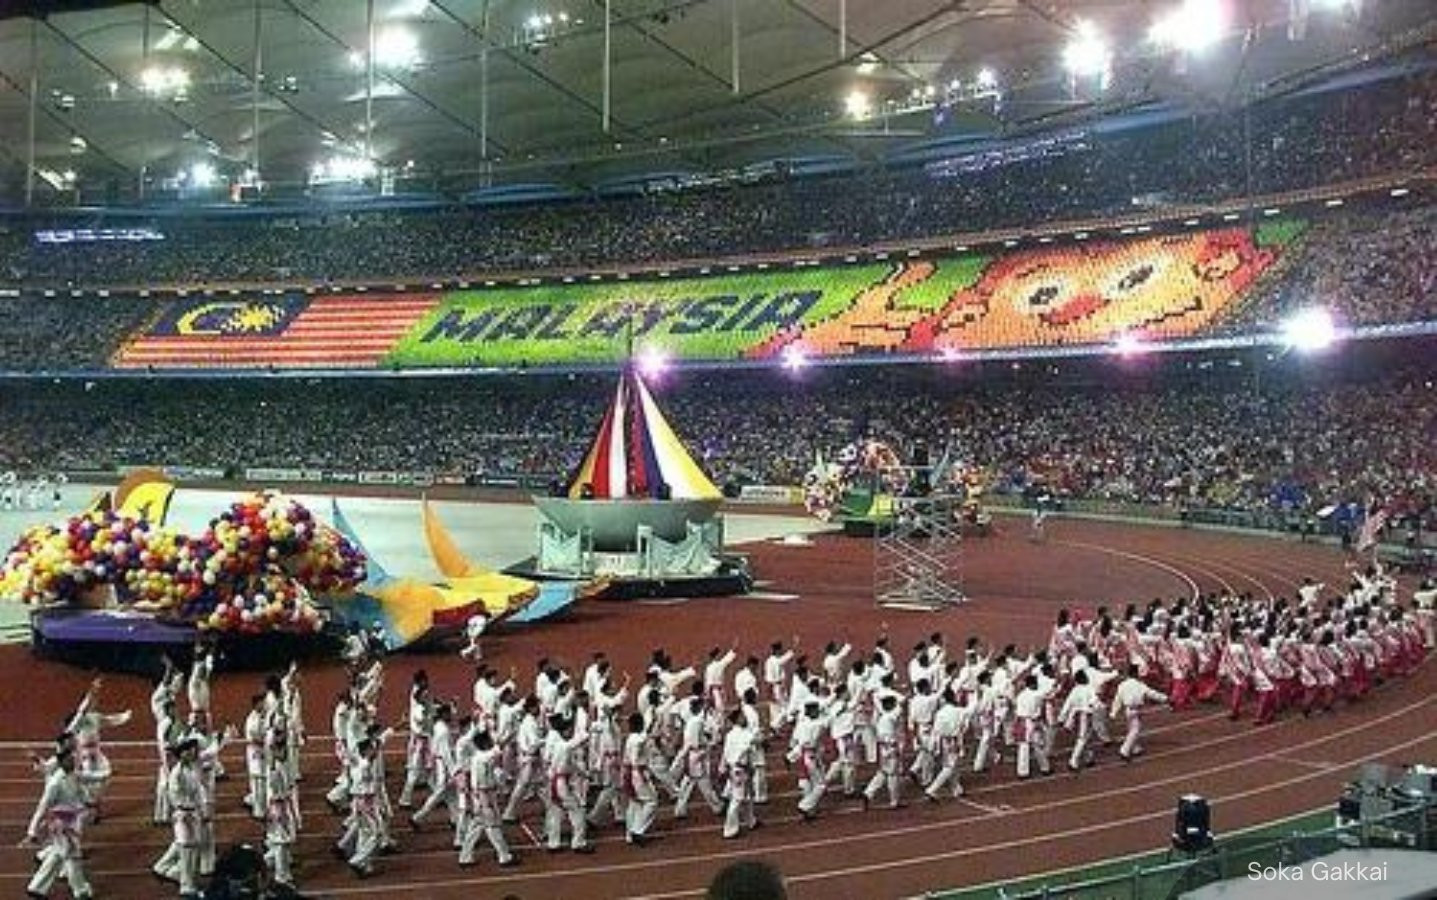 Commonwealth Games 2026: Malaysia looks set to host amid doubts over costs